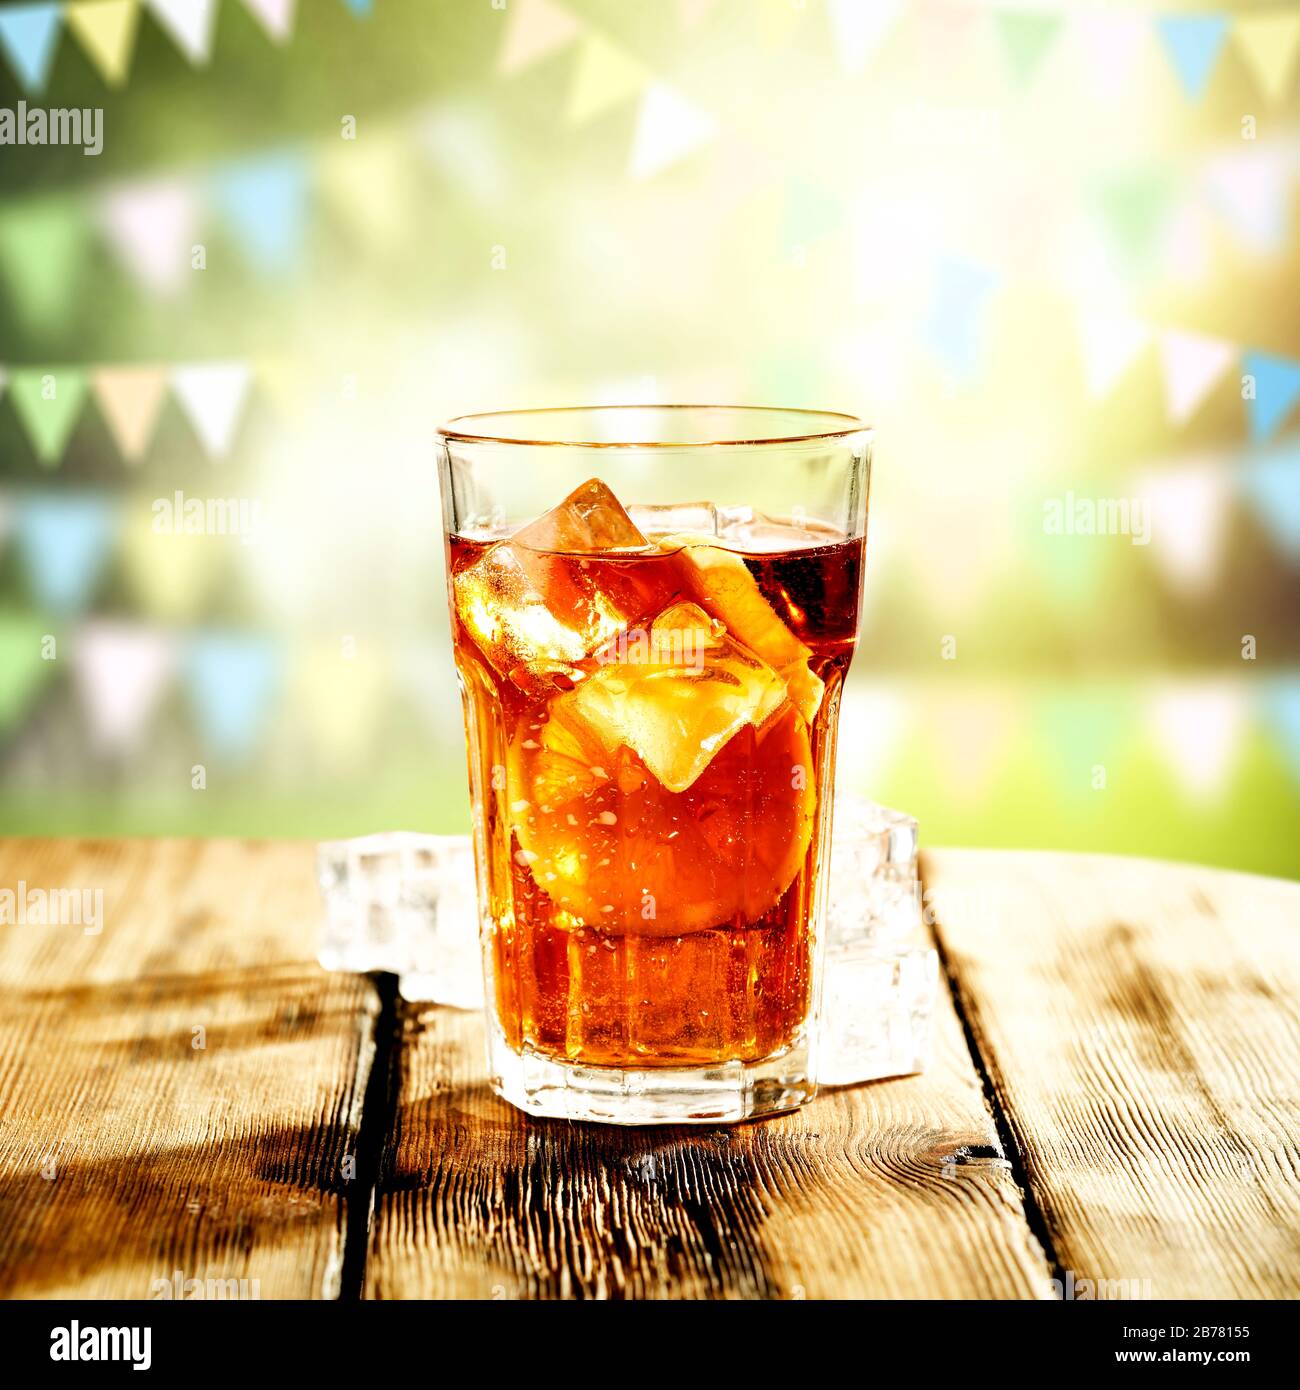 https://c8.alamy.com/comp/2B78155/ice-tea-in-a-big-glass-on-wooden-table-with-blurred-spring-outdoor-background-2B78155.jpg